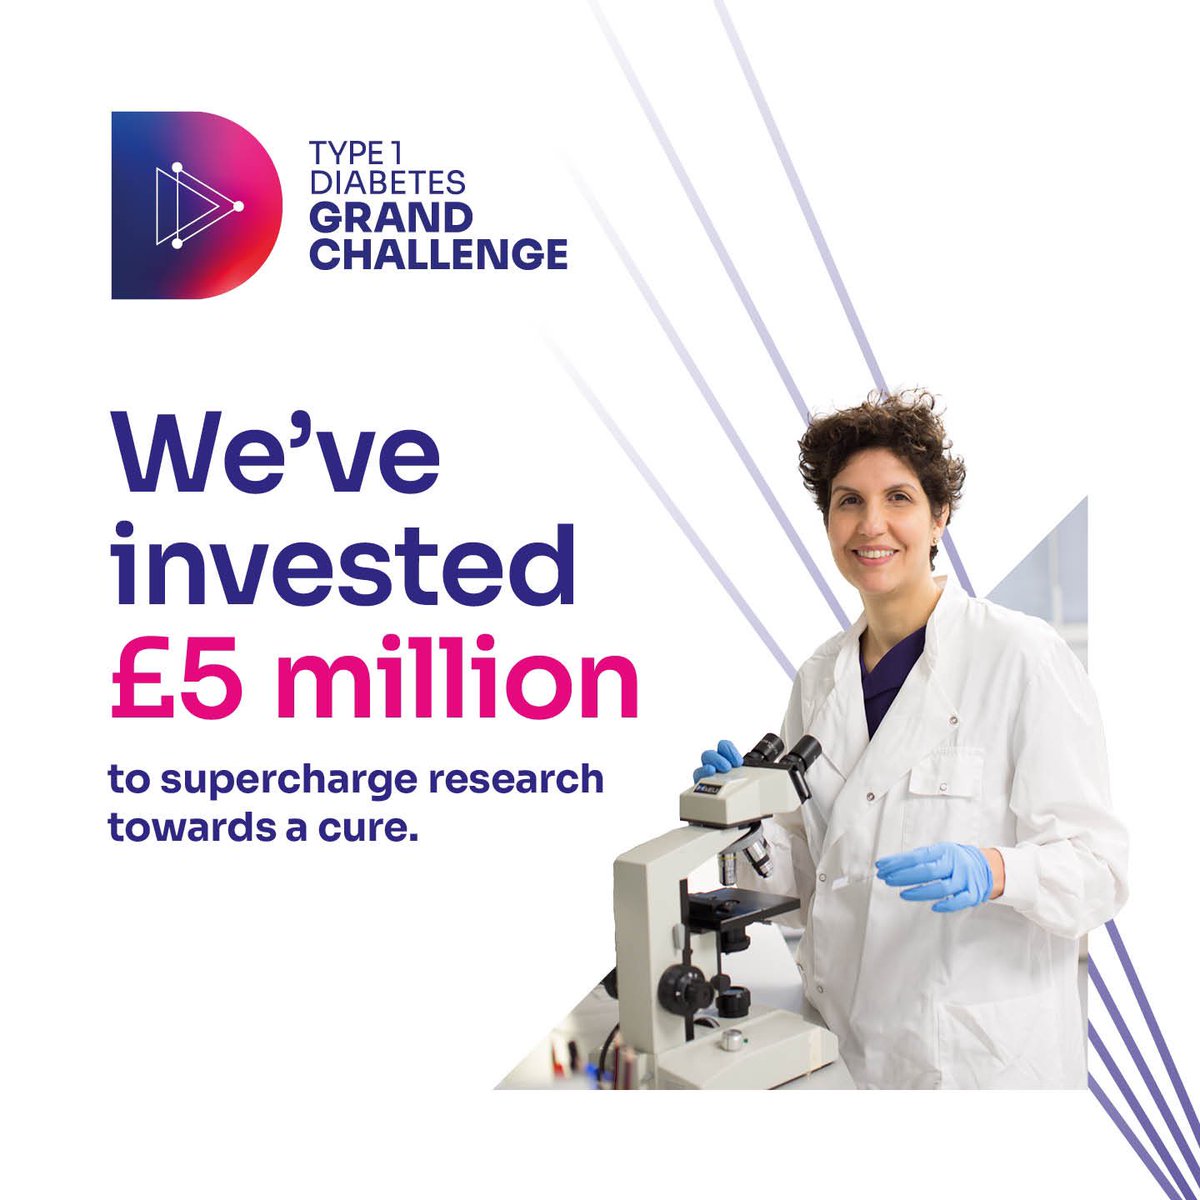 We’re happy to announce the first research projects funded by the #Type1DiabetesGrandChallenge, our partnership with @stevemorganfdn and @JDRFUK!

£5 million will fund 3 exceptional scientists to drive radical change for people with #Type1Diabetes.